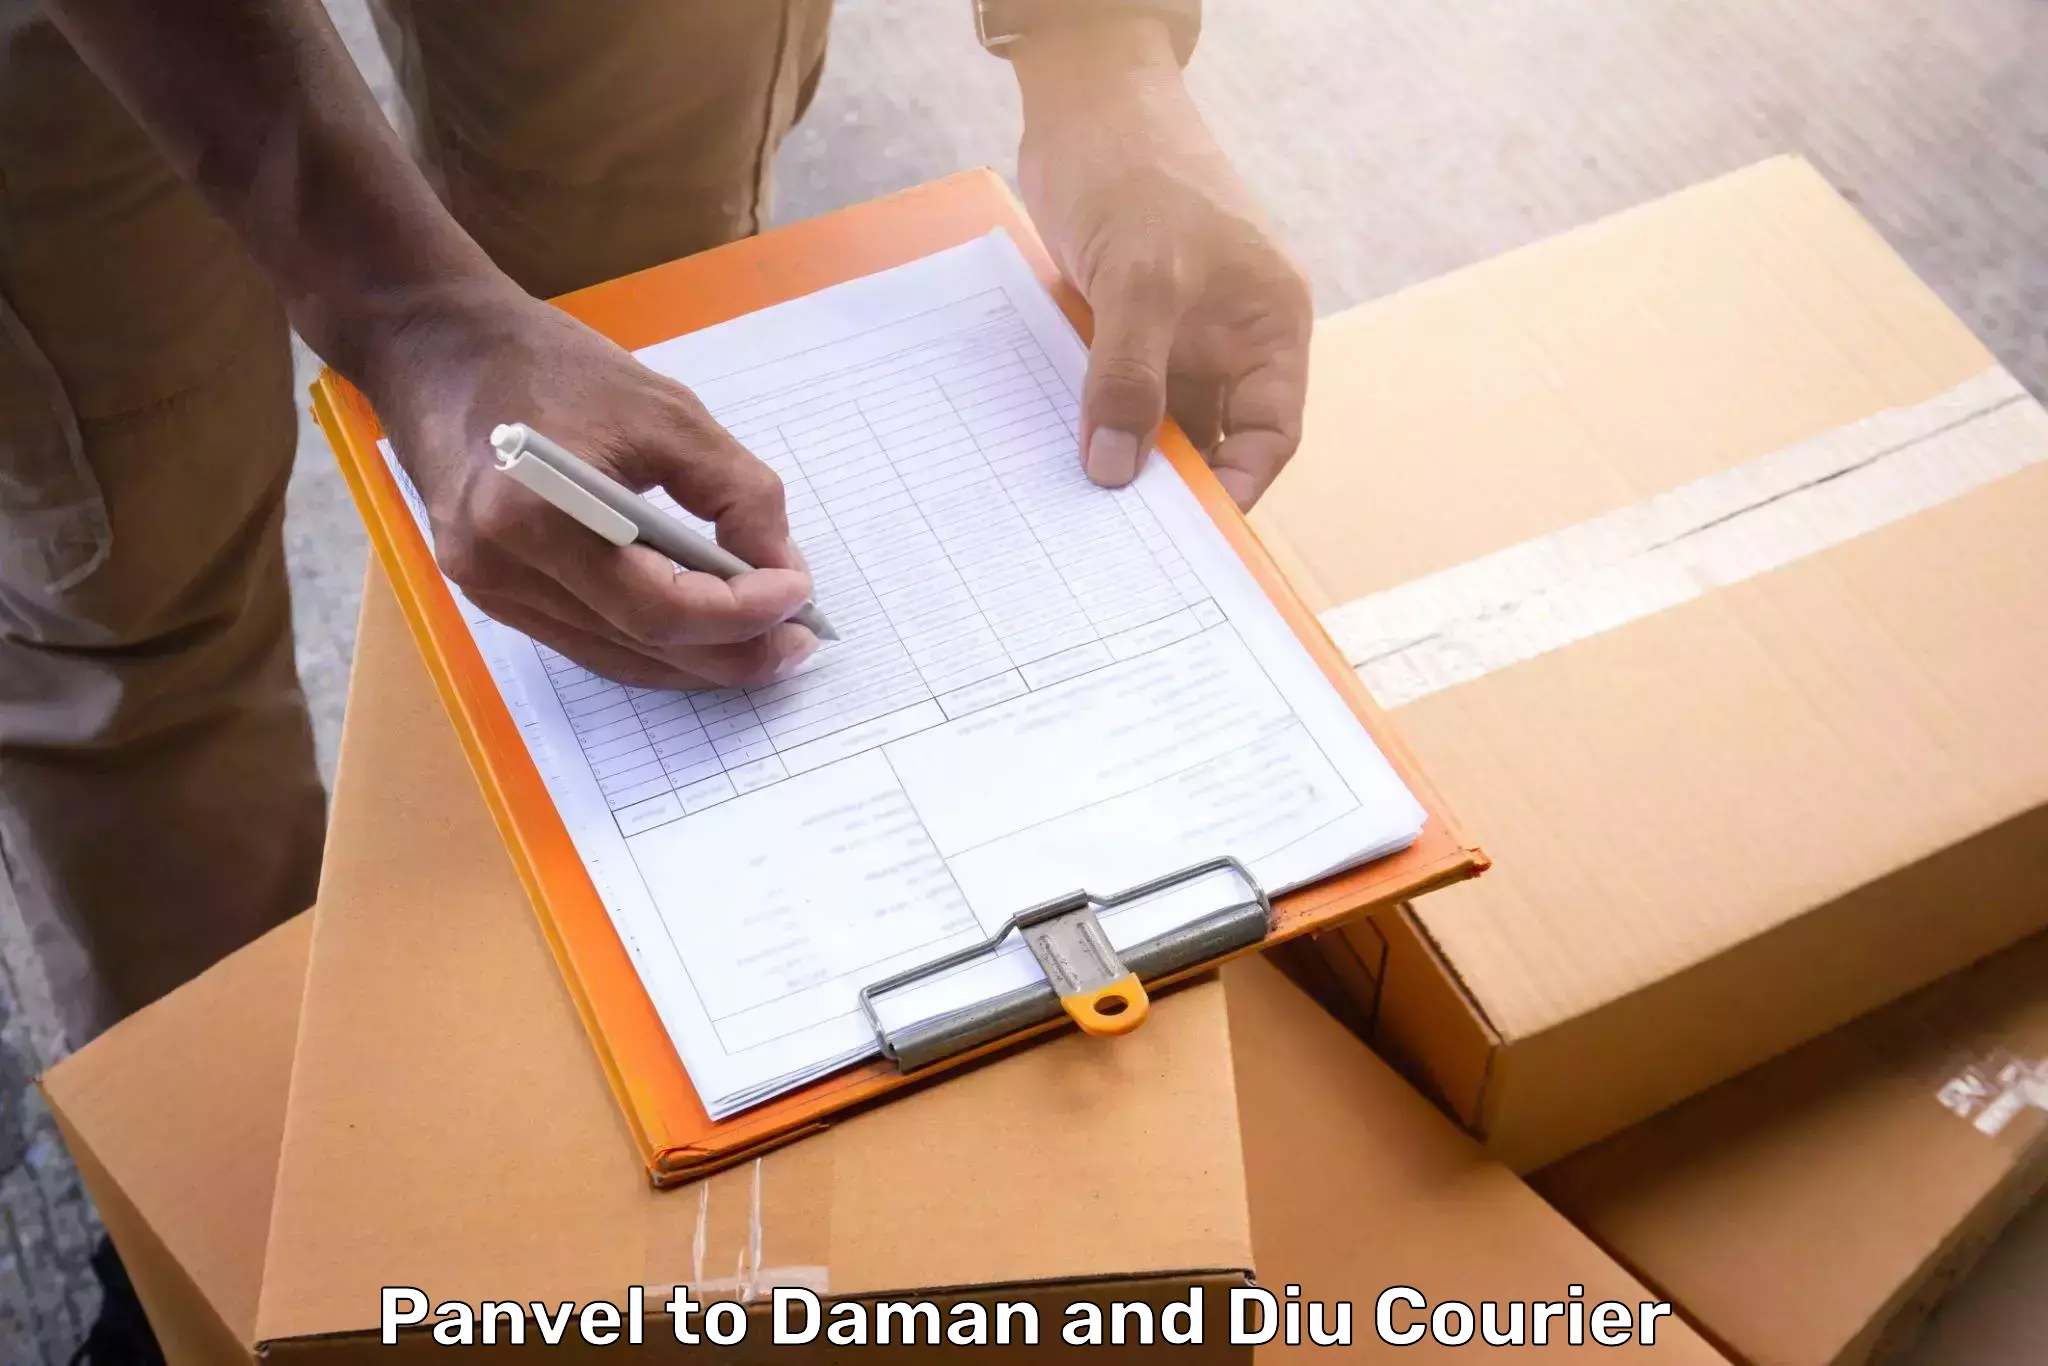 Luggage delivery providers Panvel to Daman